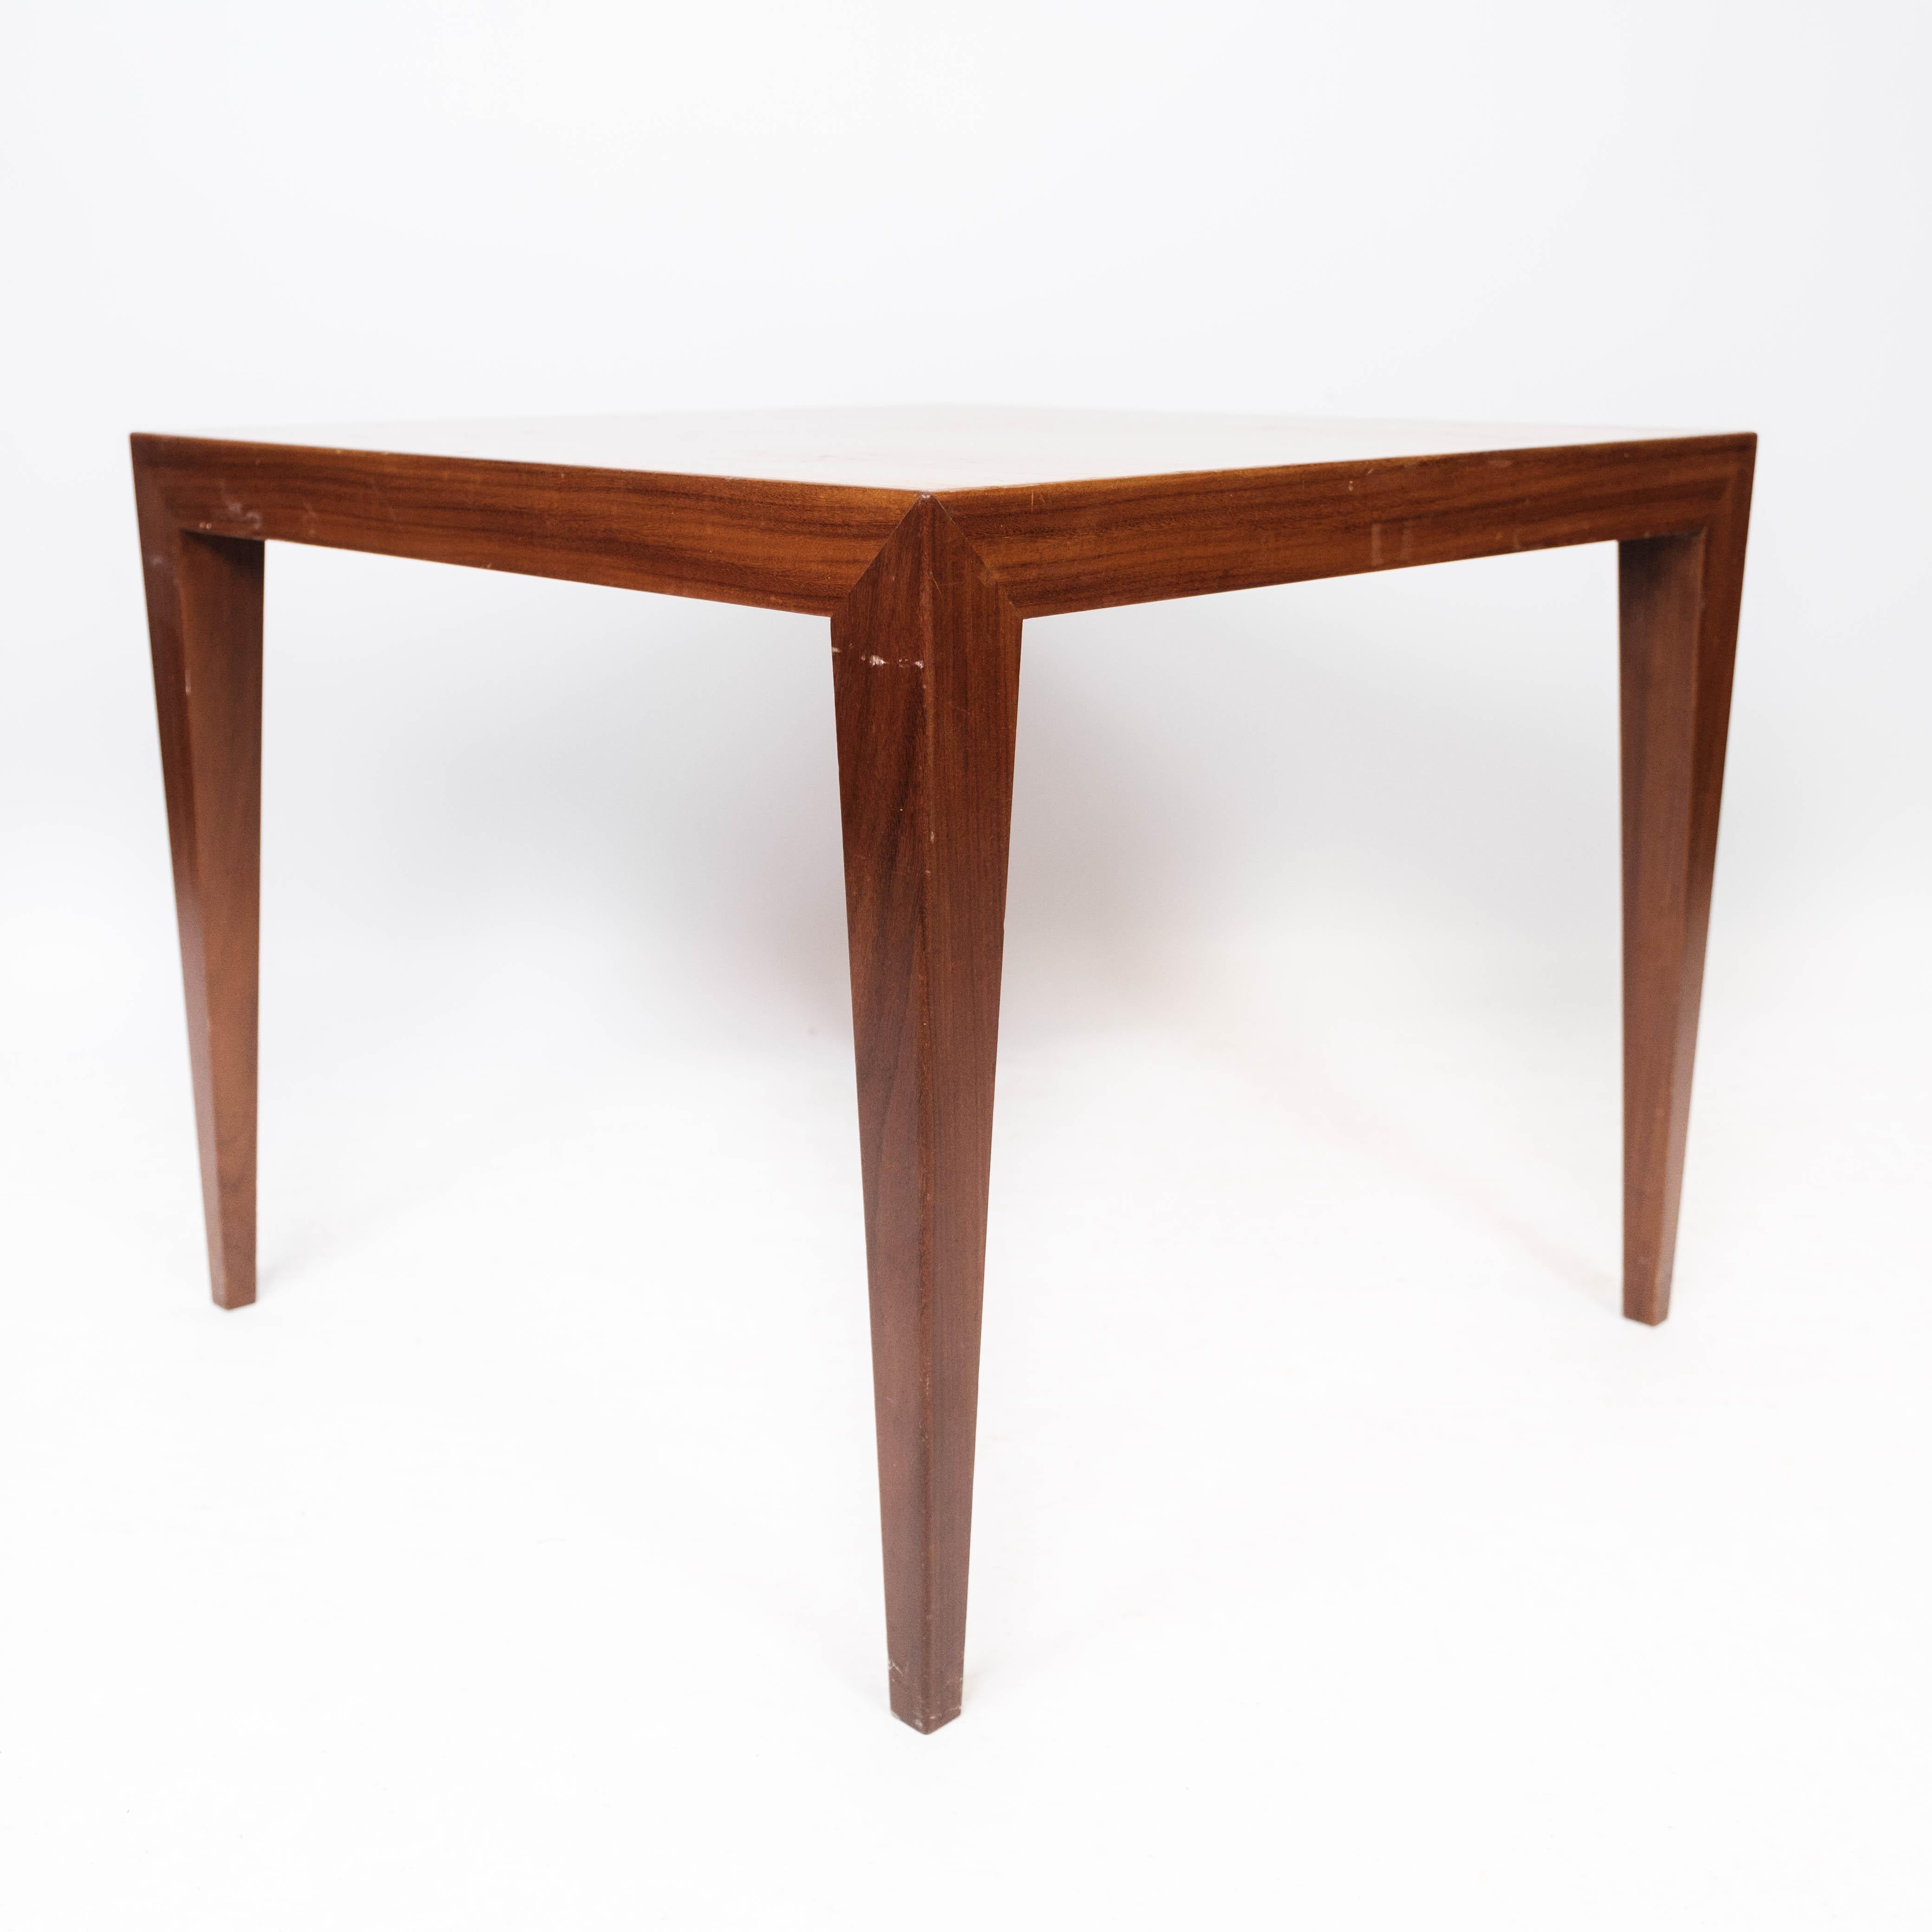 Side Table in Teak of Danish Design Manufactured by Haslev Furniture, 1960s For Sale 2